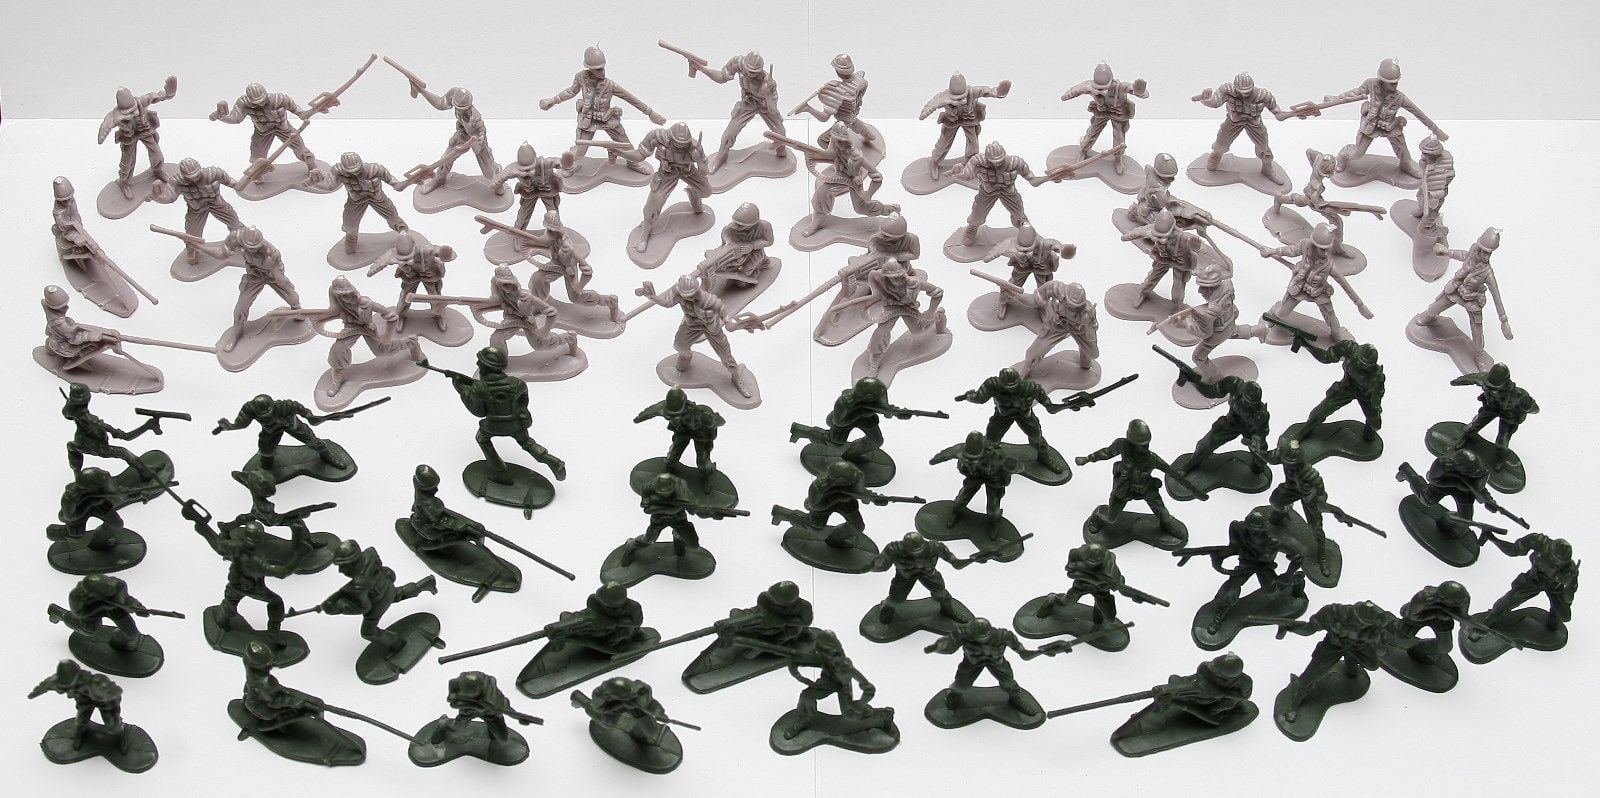 72 pc Army Men Toy Soldiers Military Gray Green Plastic Figurine Action Figure 